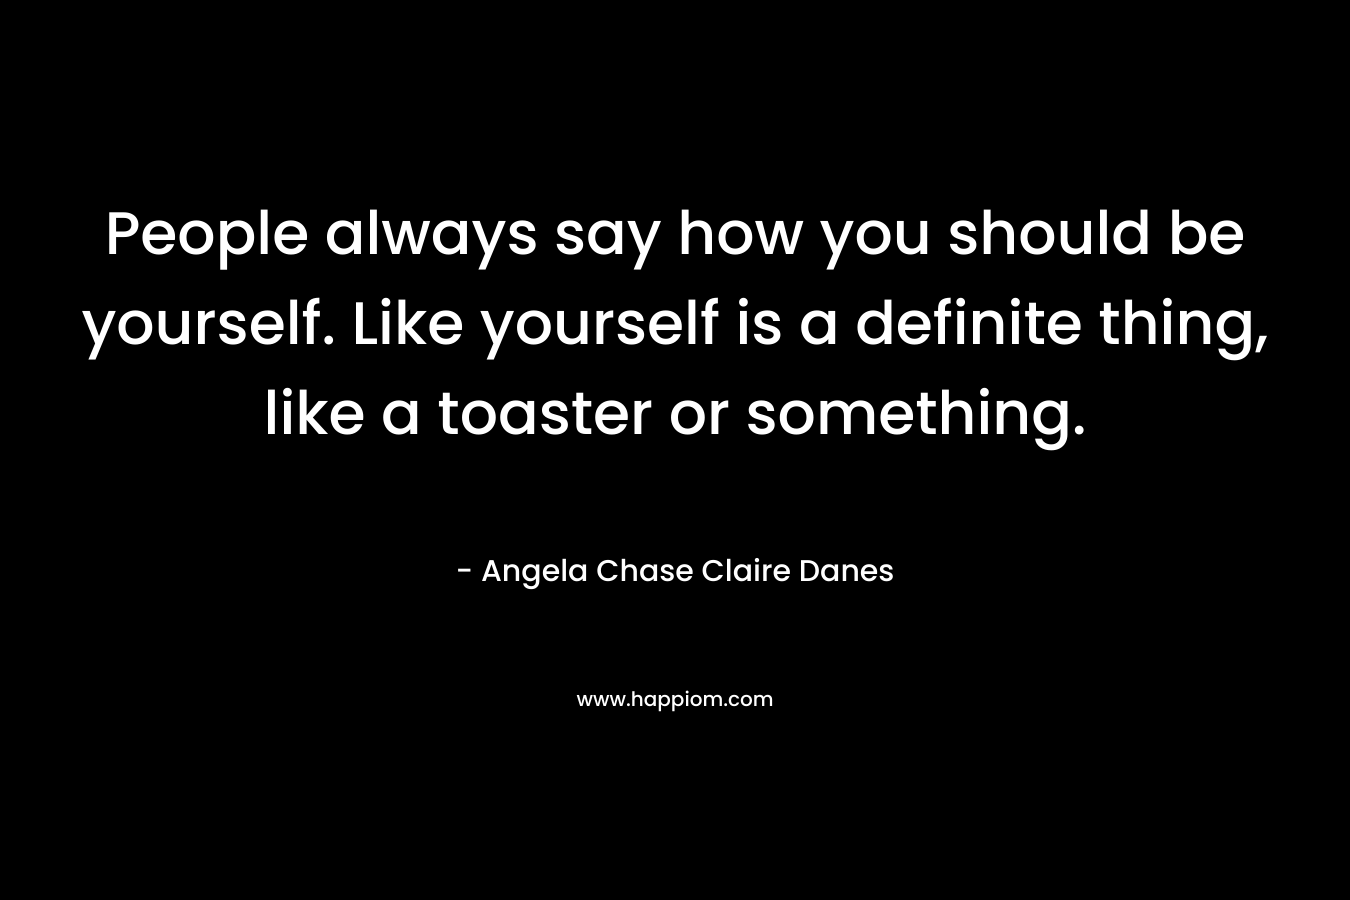 People always say how you should be yourself. Like yourself is a definite thing, like a toaster or something.